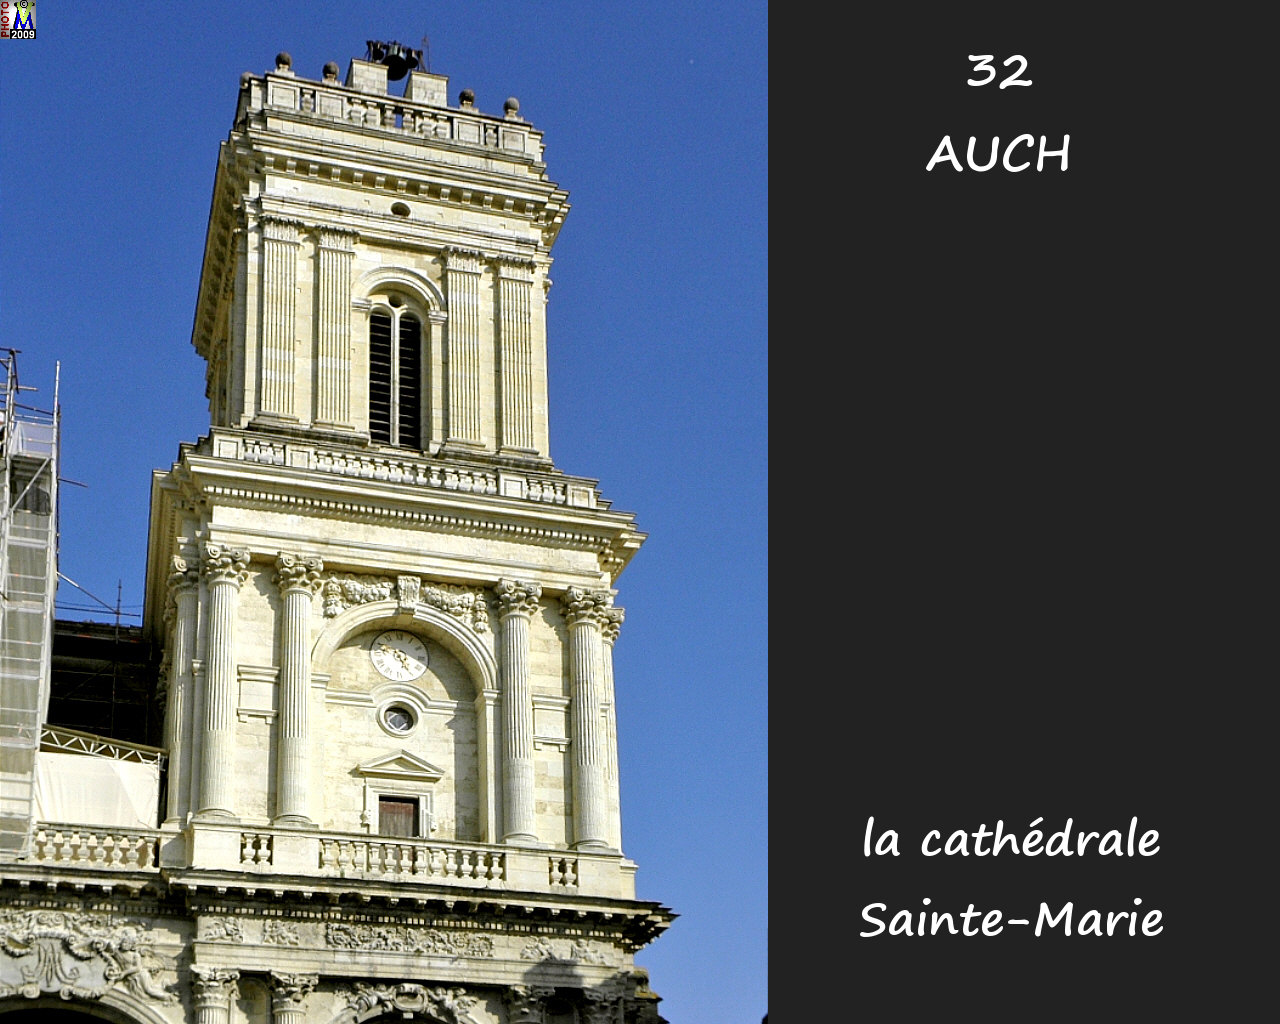 32AUCH_cathedrale_108.jpg